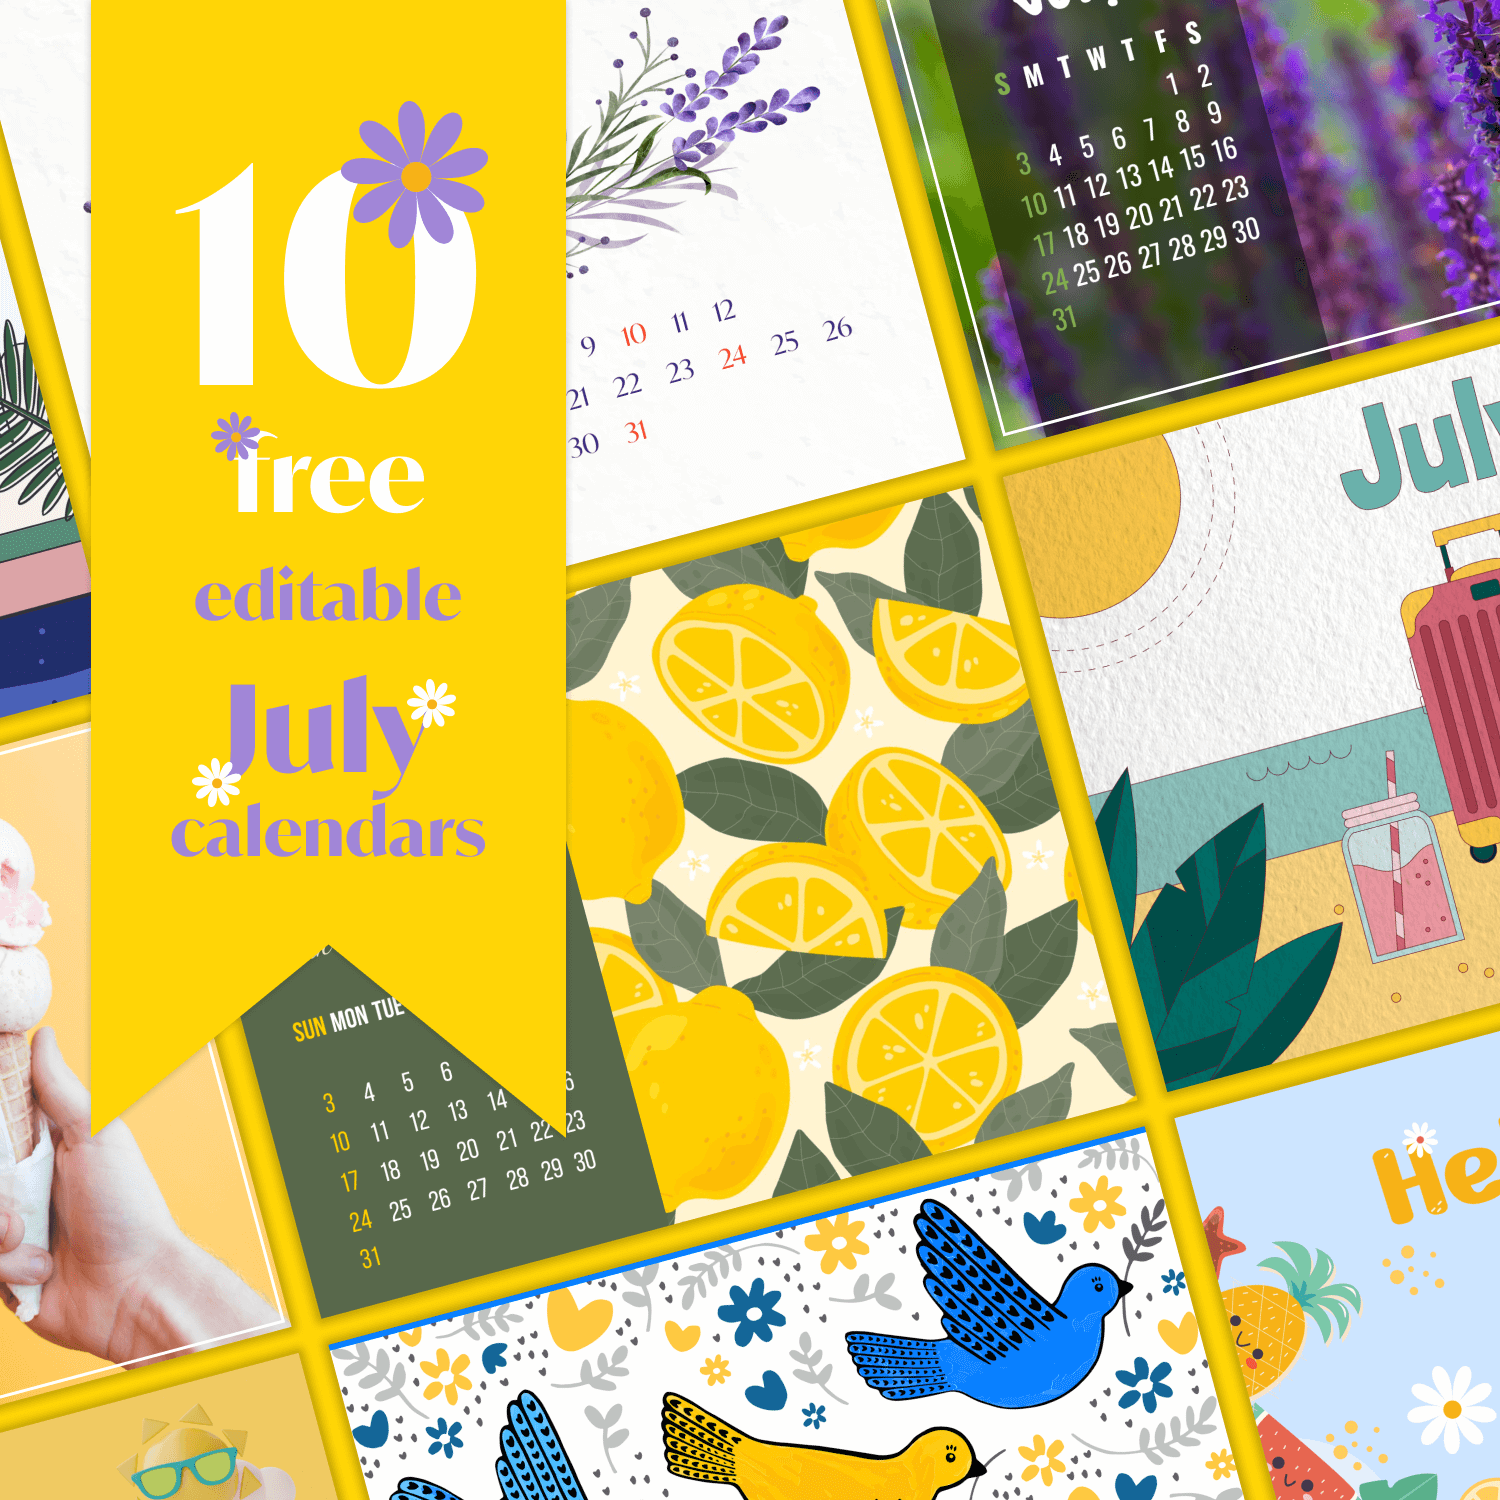 10 Free Editable July Calendars cover image.